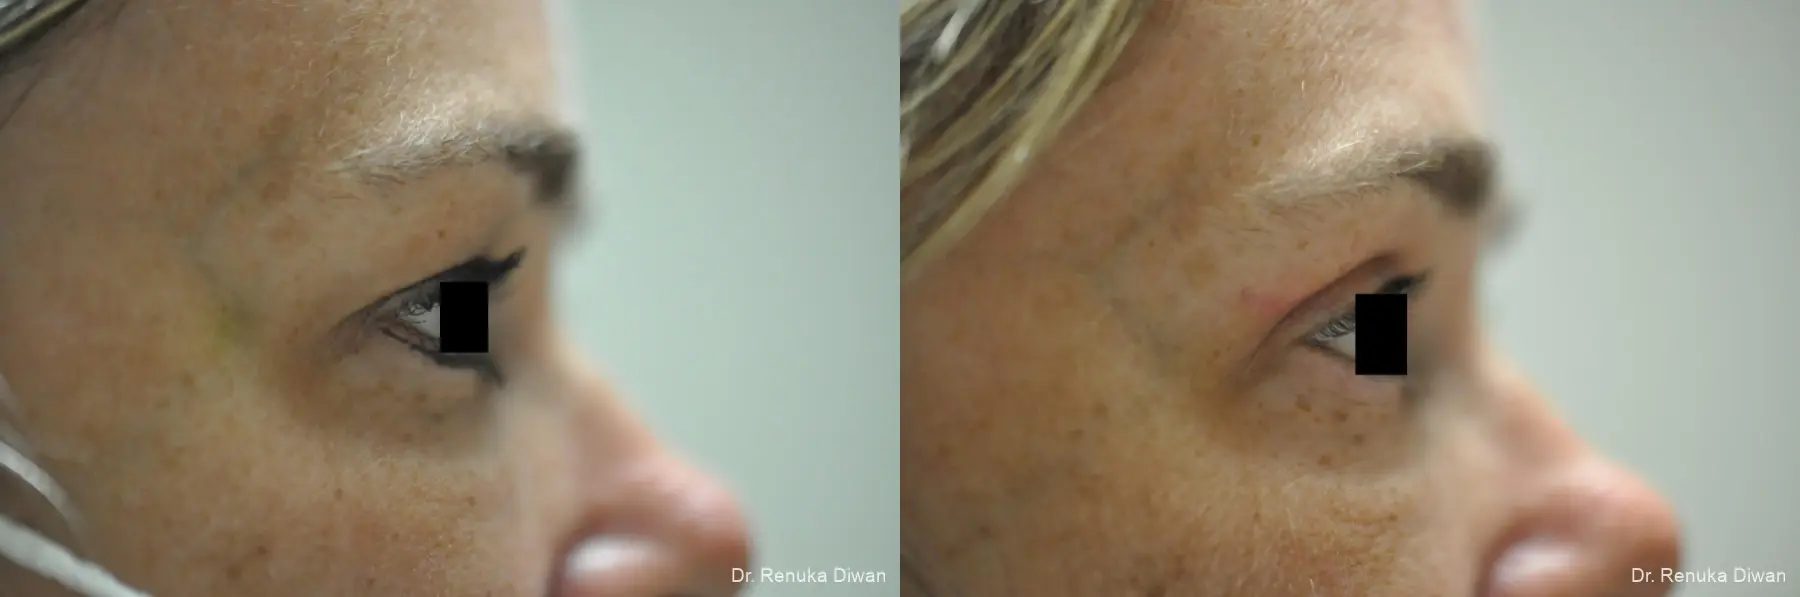 Blepharoplasty: Patient 3 - Before and After 4